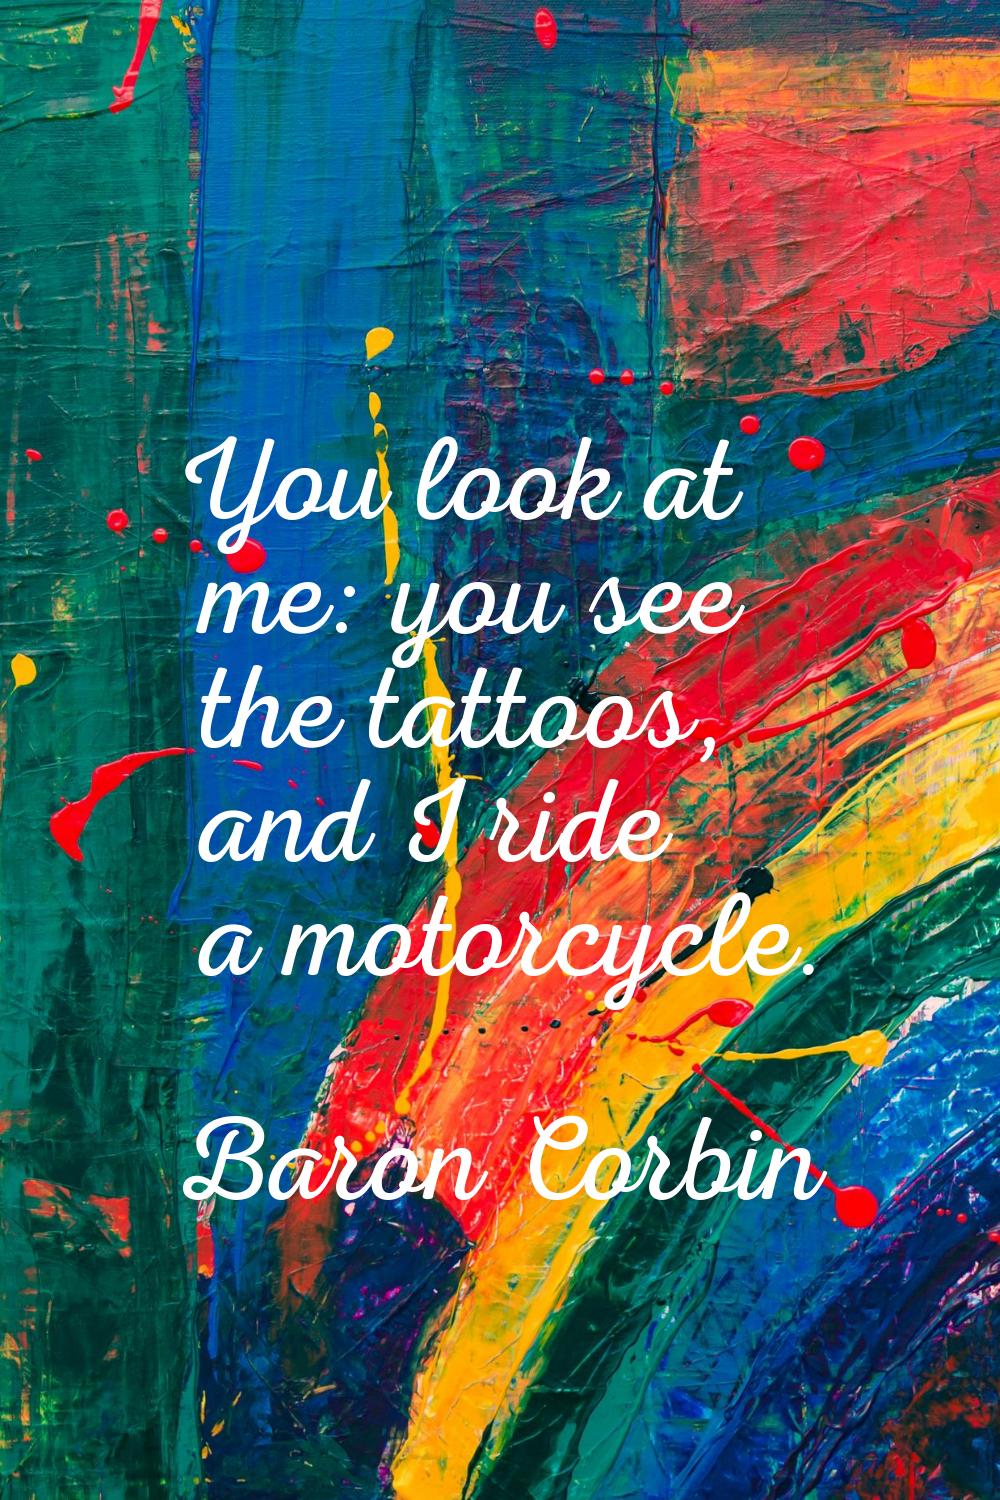 You look at me: you see the tattoos, and I ride a motorcycle.